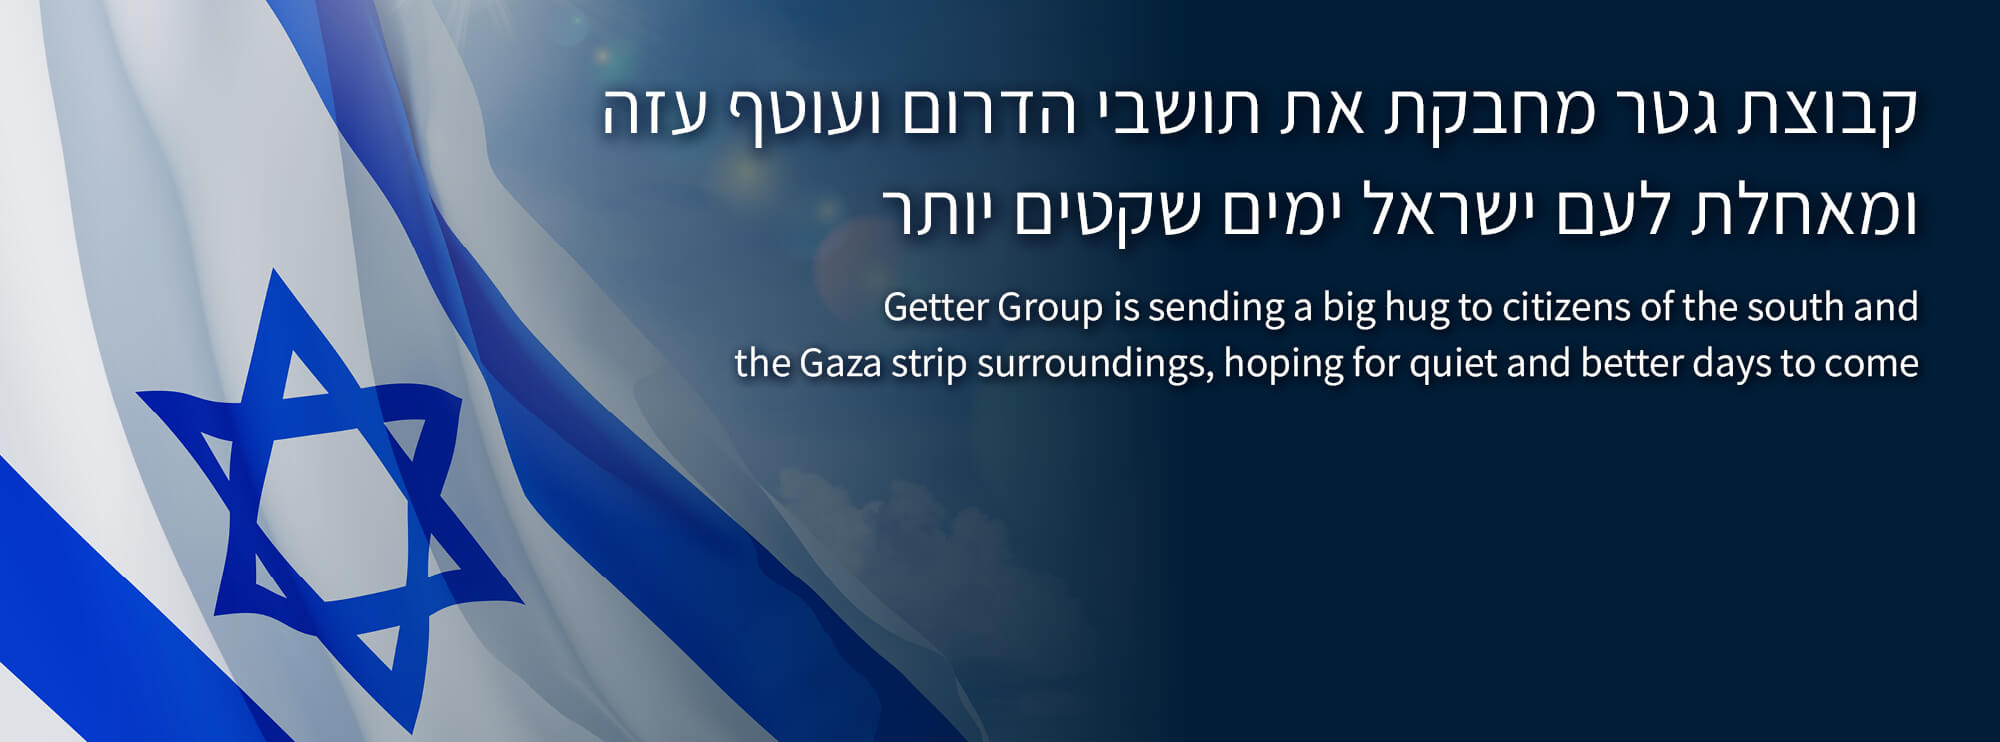 23 01 08 18 getter stand with Israel Group 2000x742